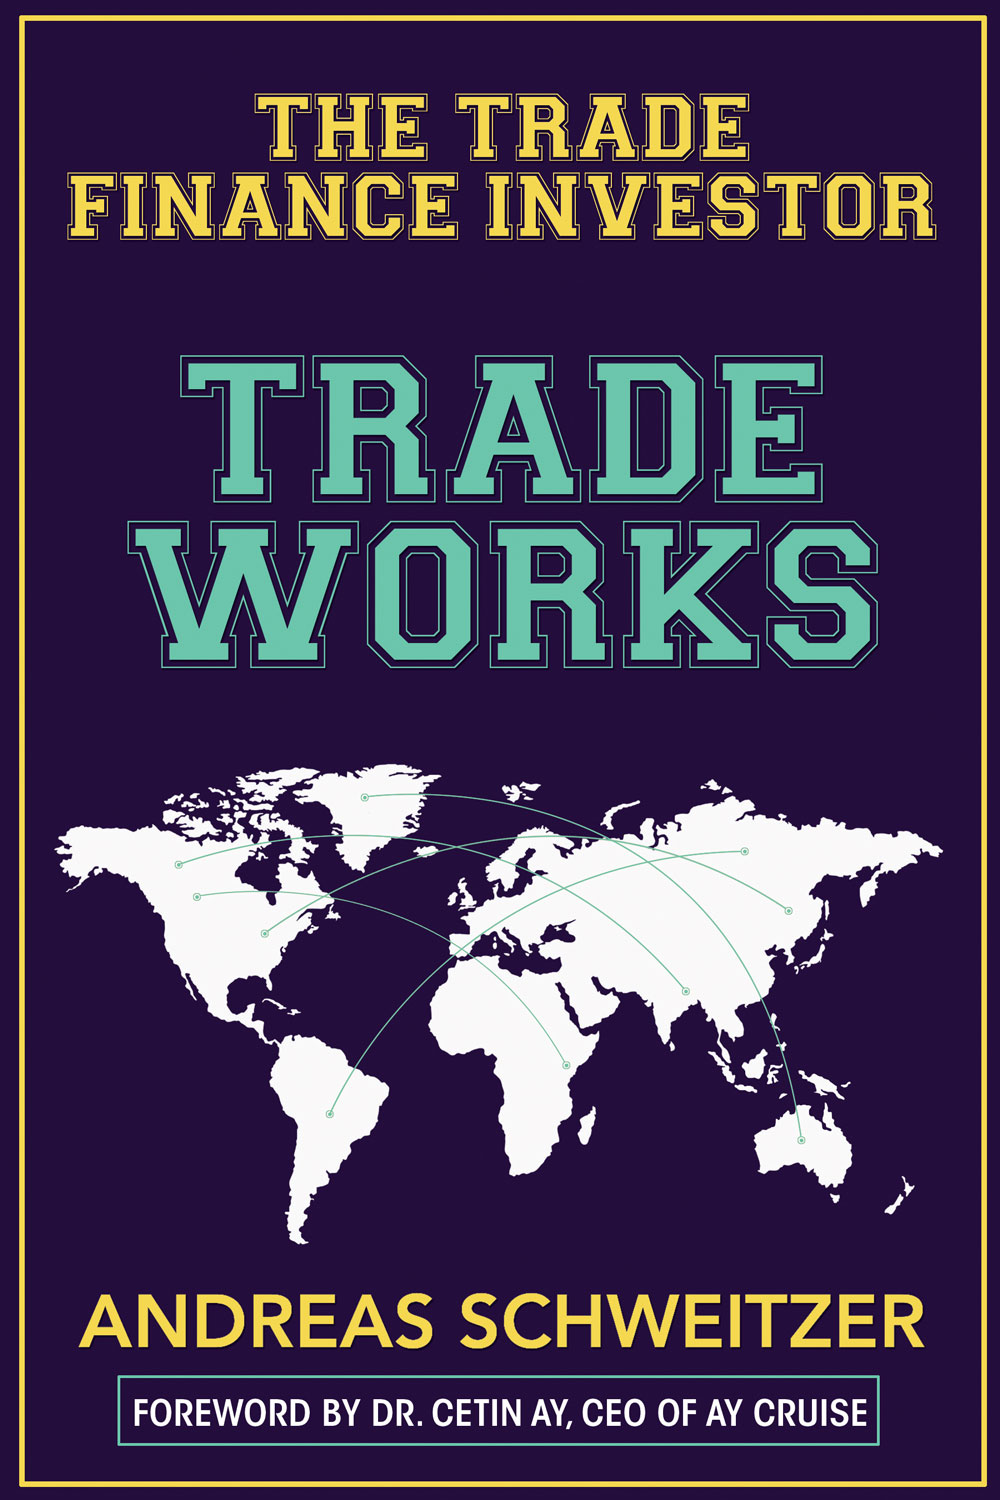 Article about Trade Works: A Finance Book Like No Other – Investment Expert and Bestselling Author Illuminates the World of Trade Finance